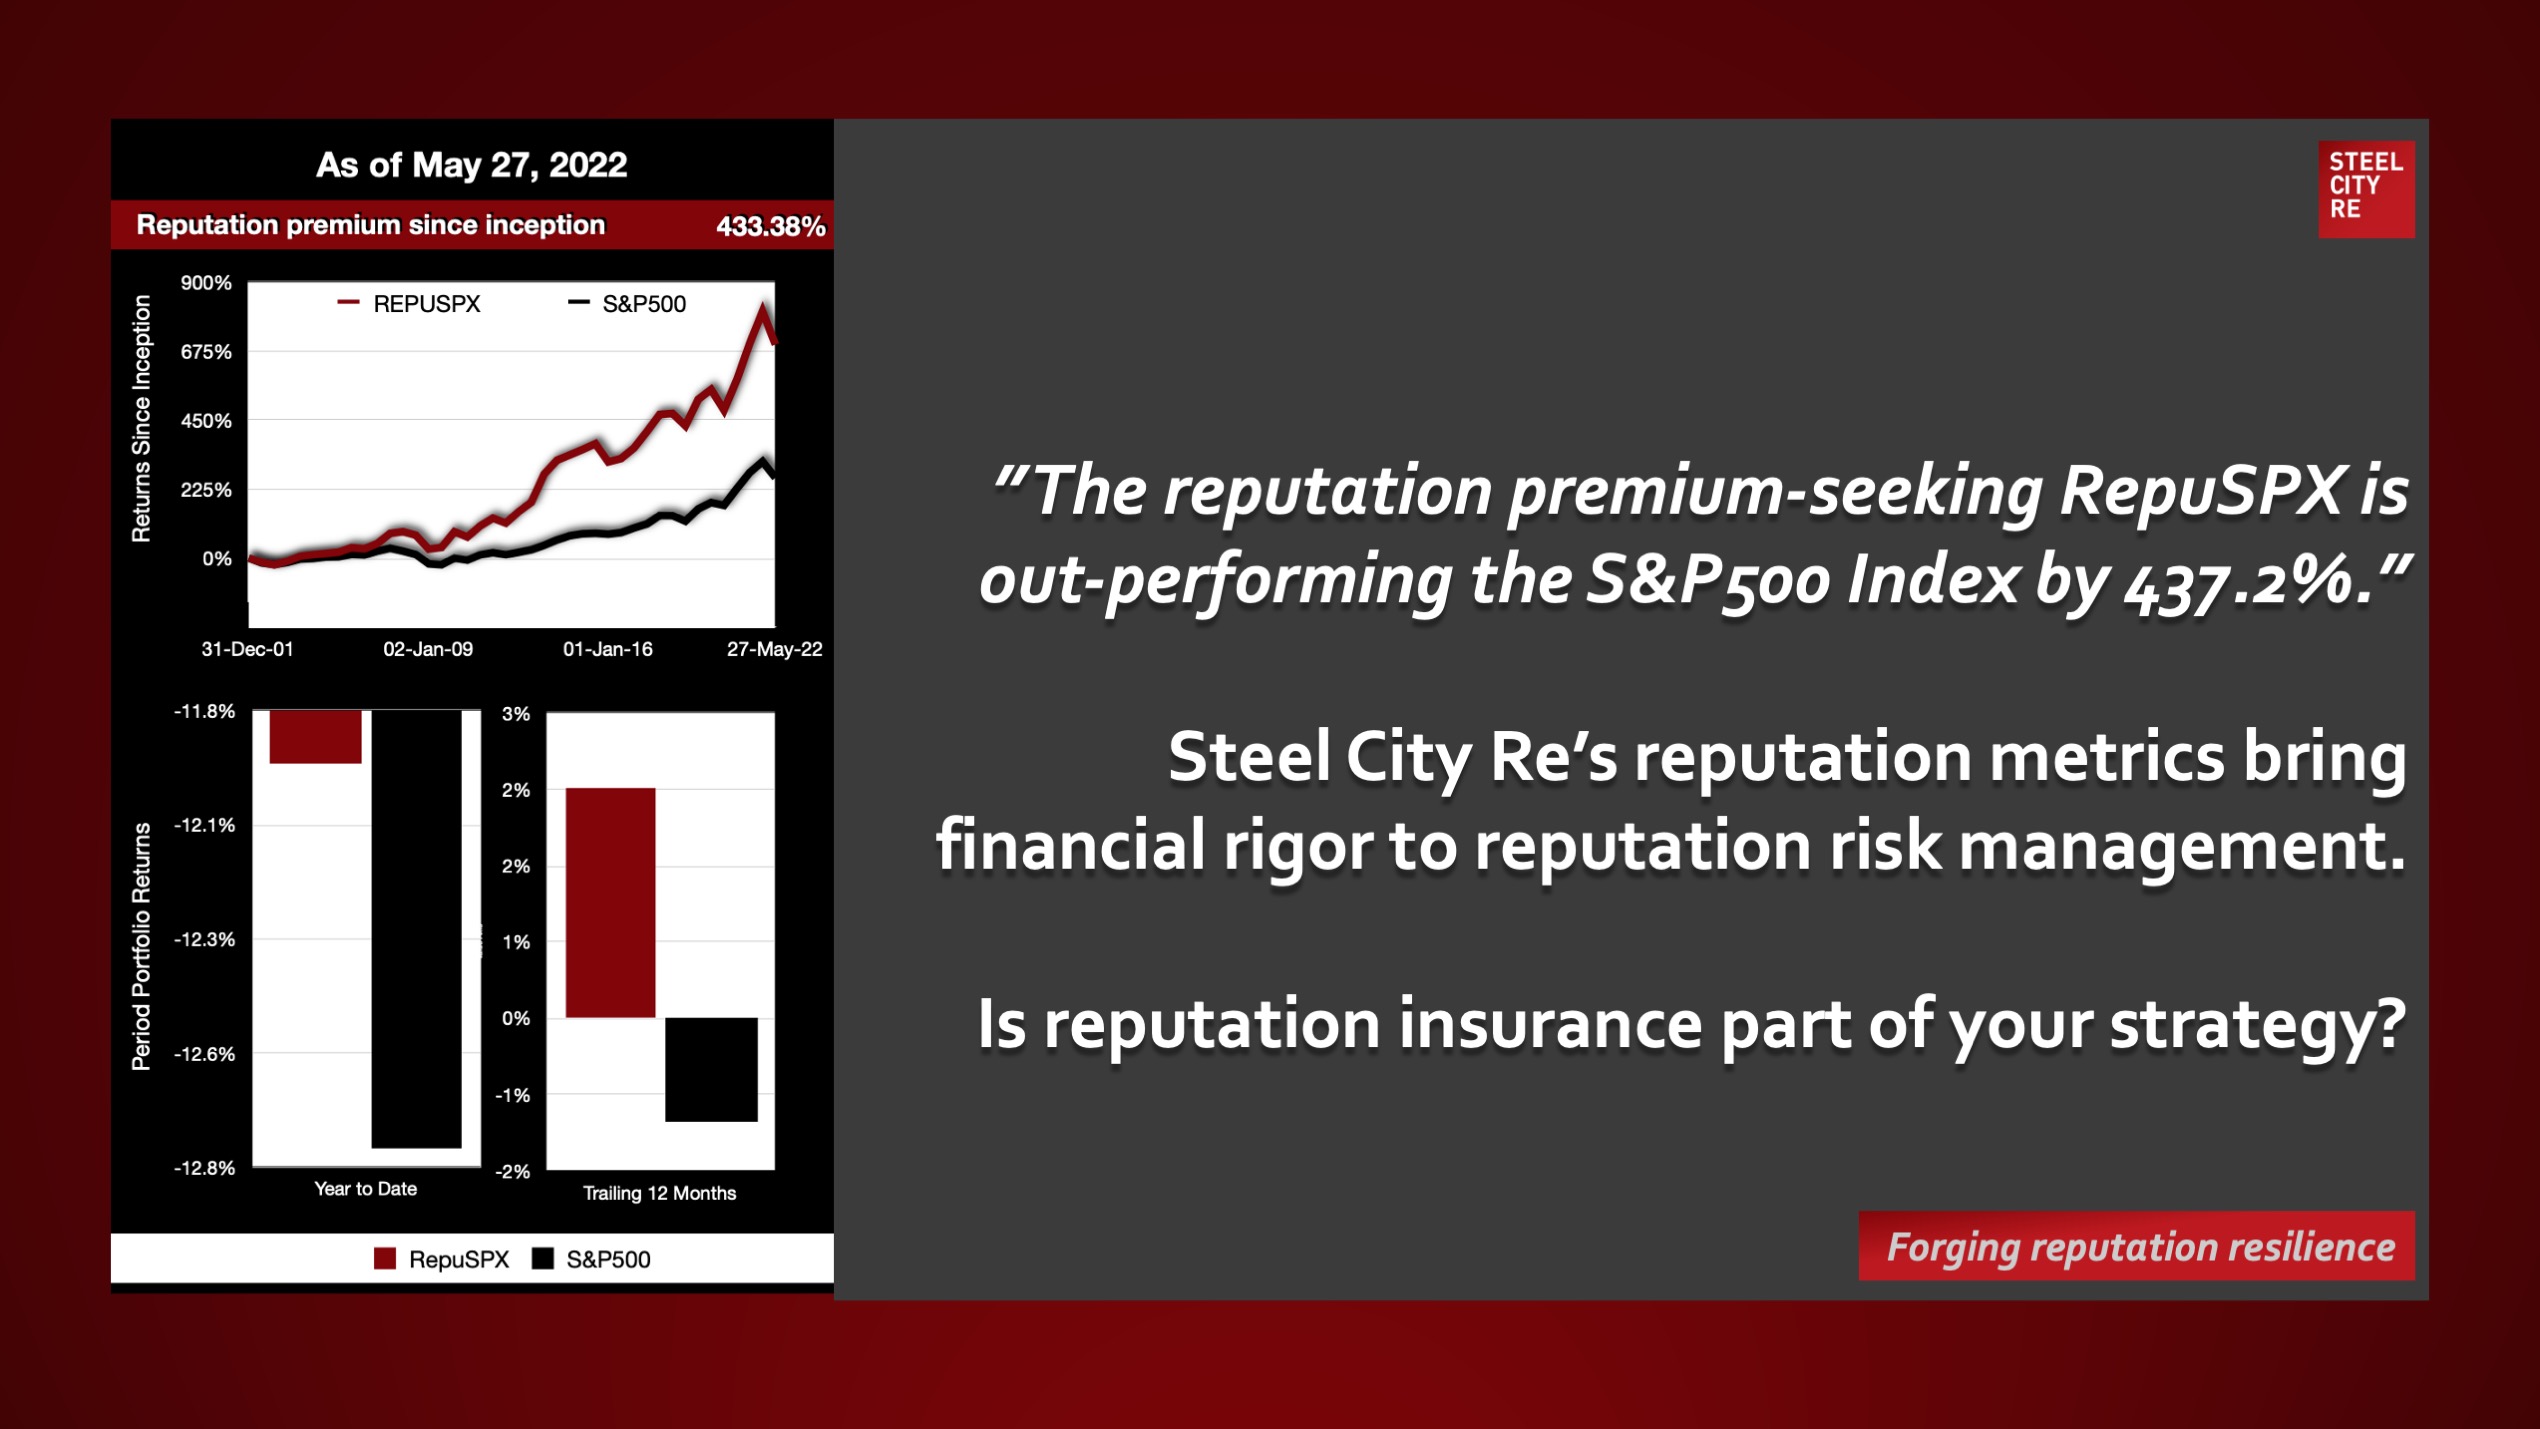 Reputation value is a strategic power. Companies harness their reputation to sell more, faster, and at premium prices; and to obtain labor, vendor services, as well as capital on preferred terms. - Steel City Re RepuSPX 30 May 22